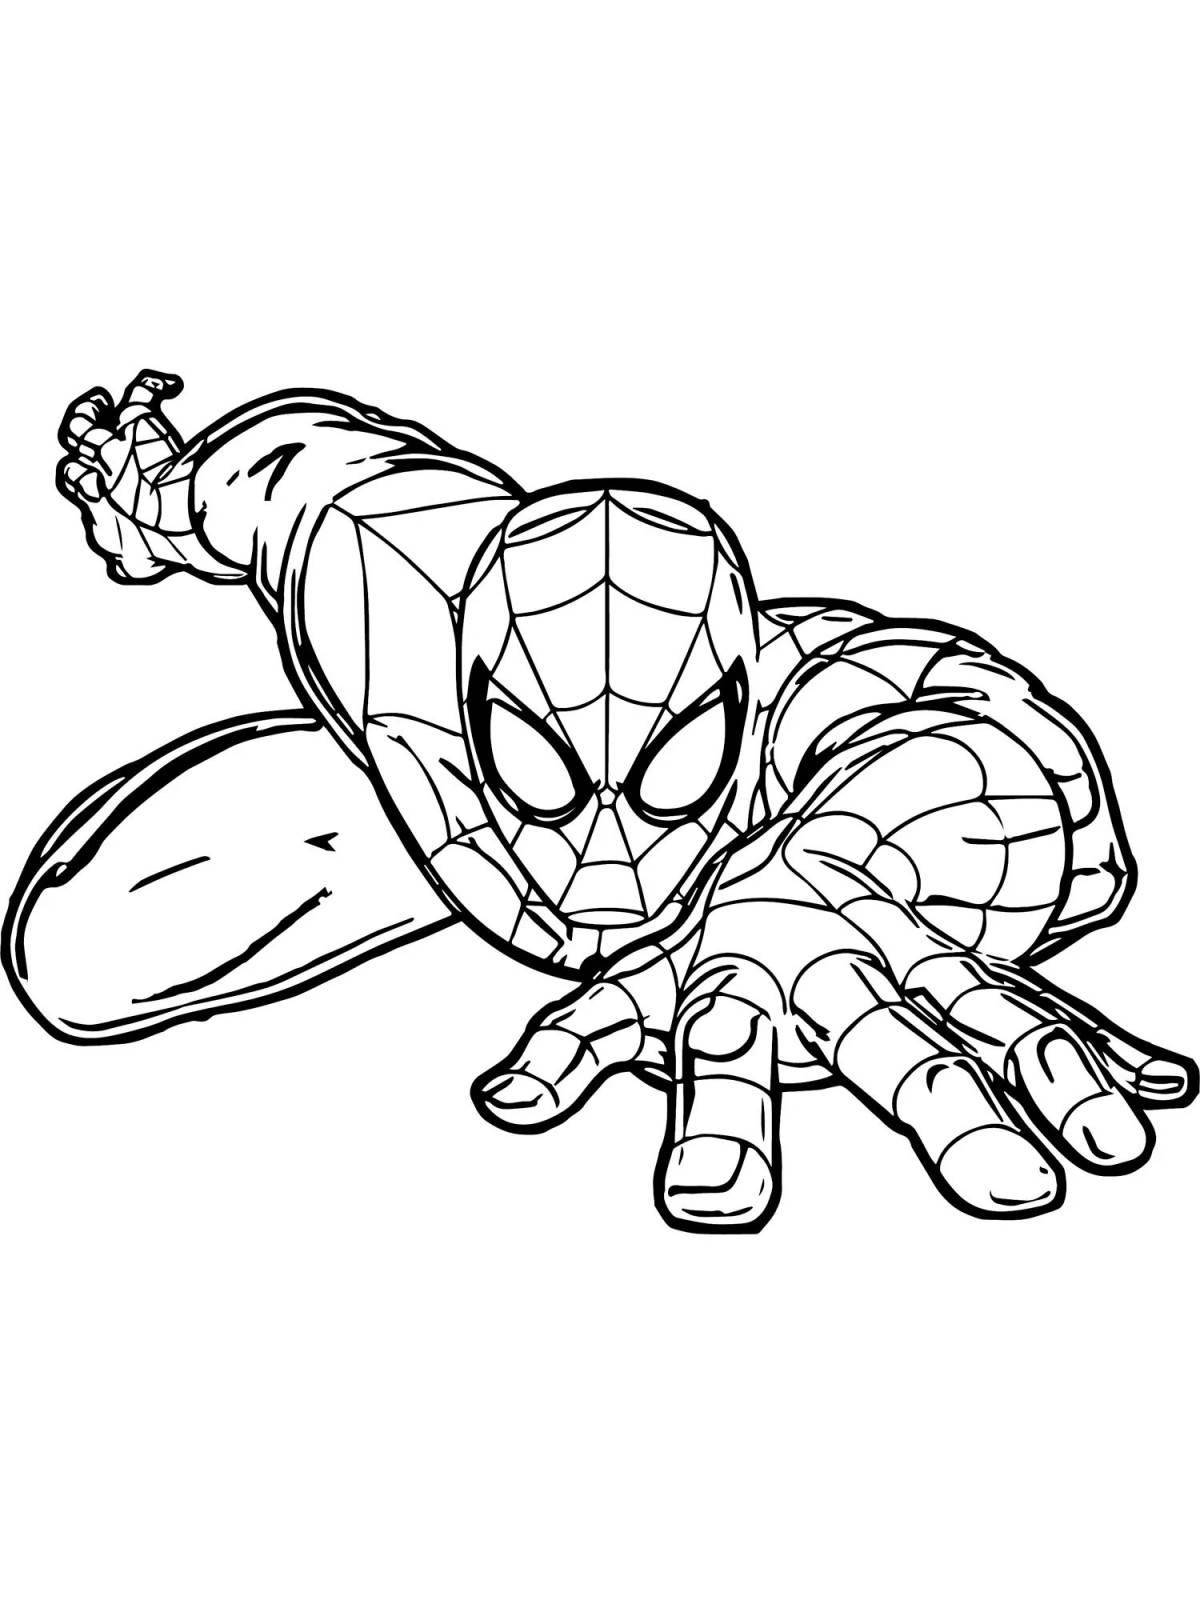 Colorful spiderman zombie coloring book